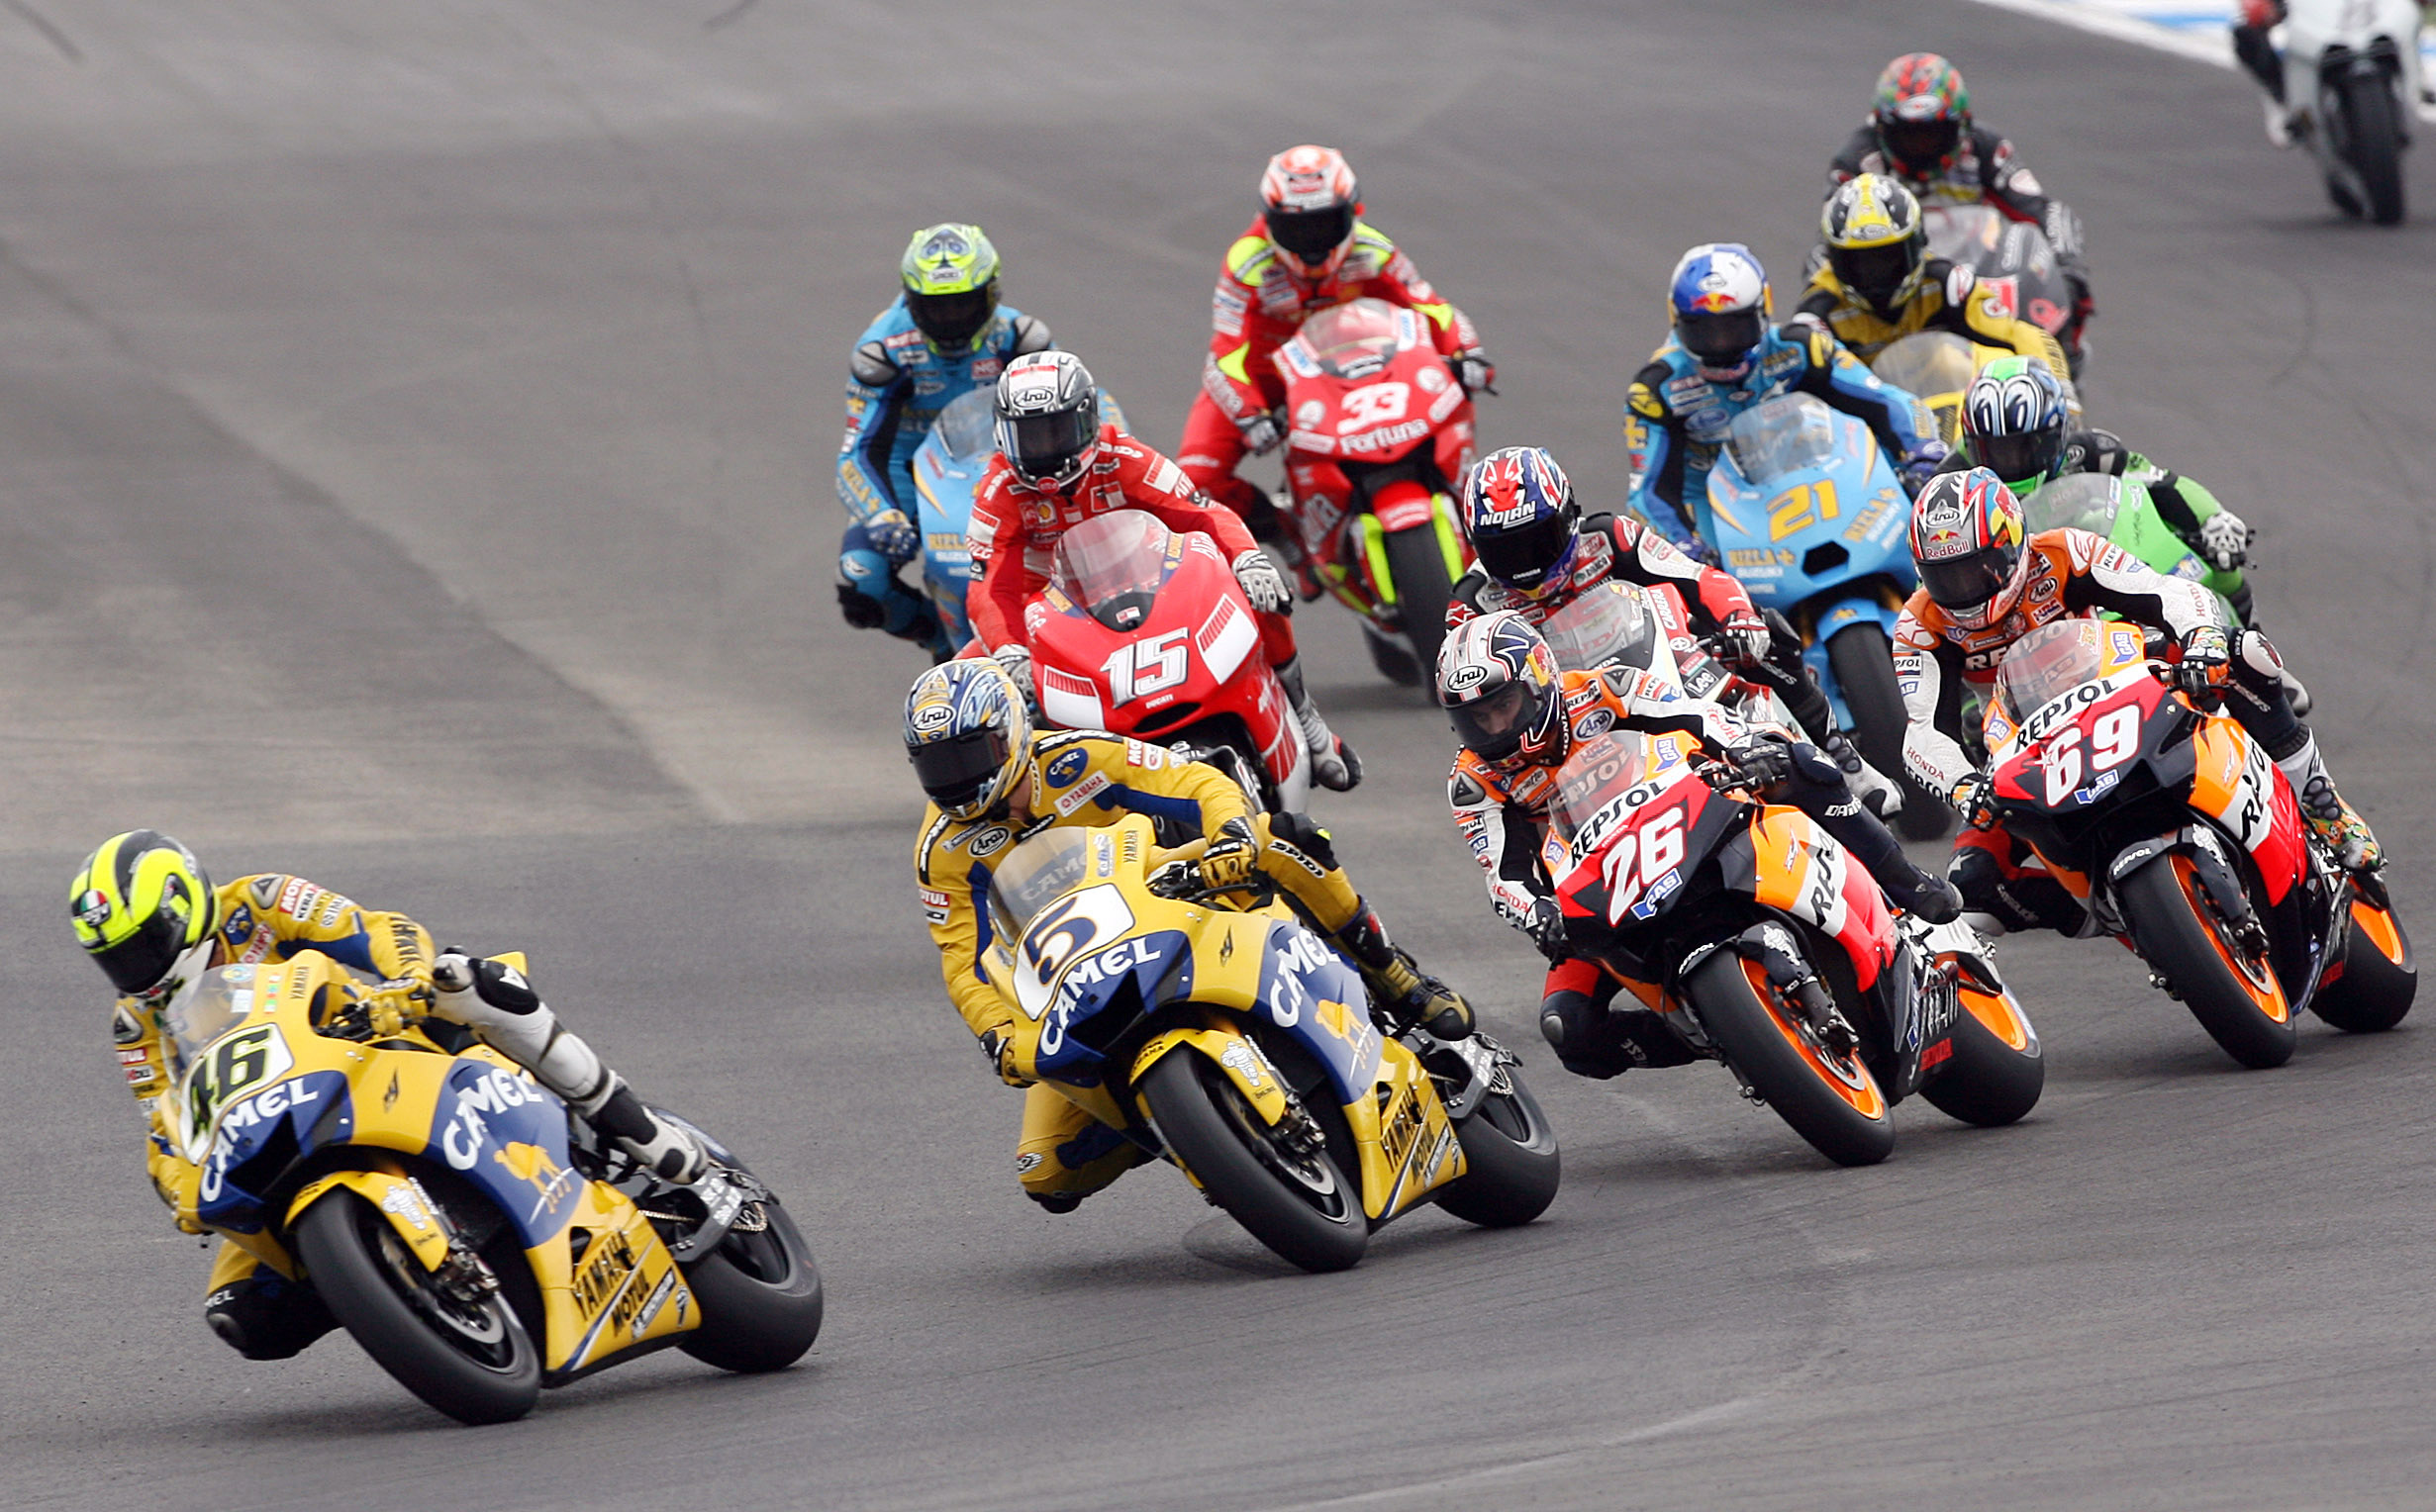 Yamaha motoGP rider Valentino Rossi of Italy leads the pack of riders at the start of the Portugese Grand Prix